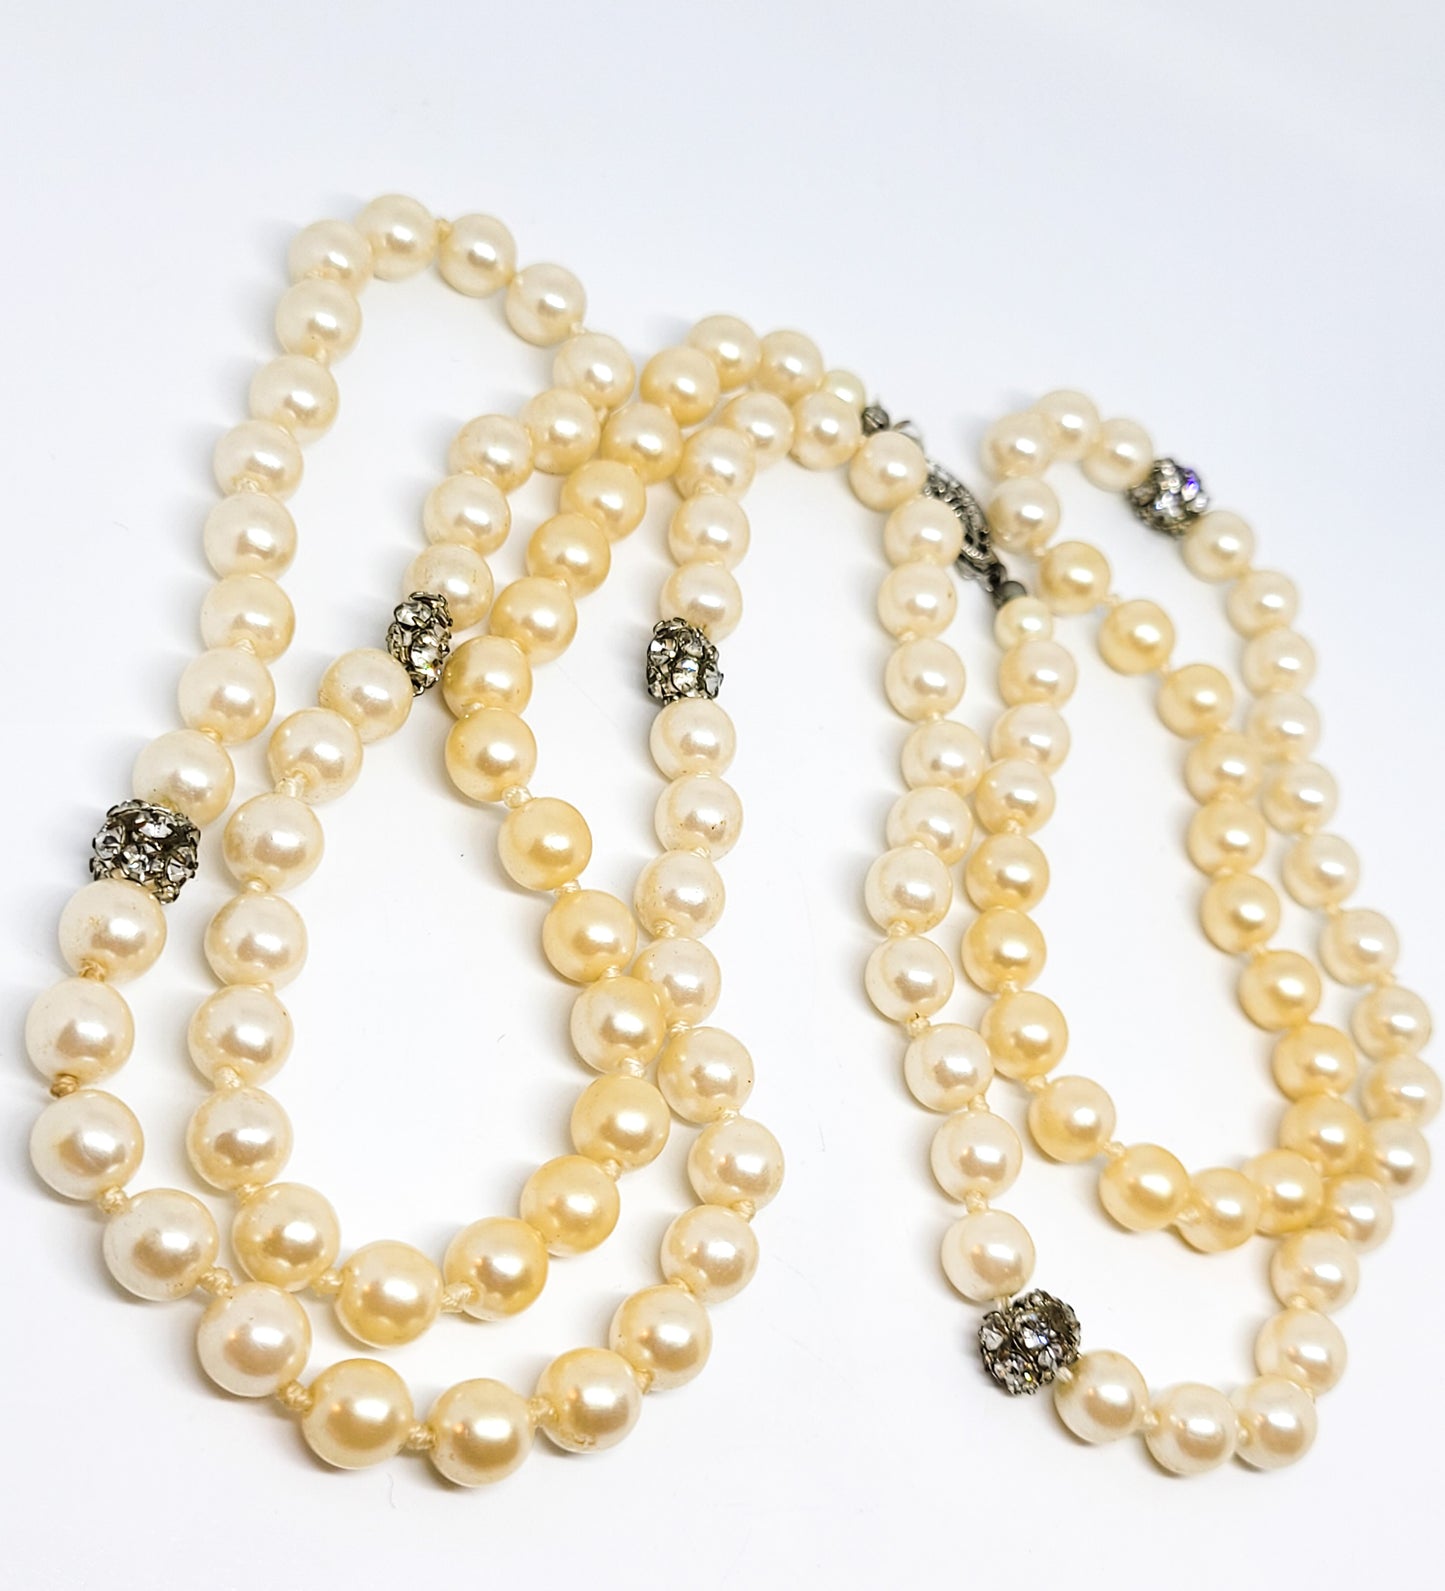 Cream pearl and rhinestone beaded hand knotted long vintage necklace 42 inches